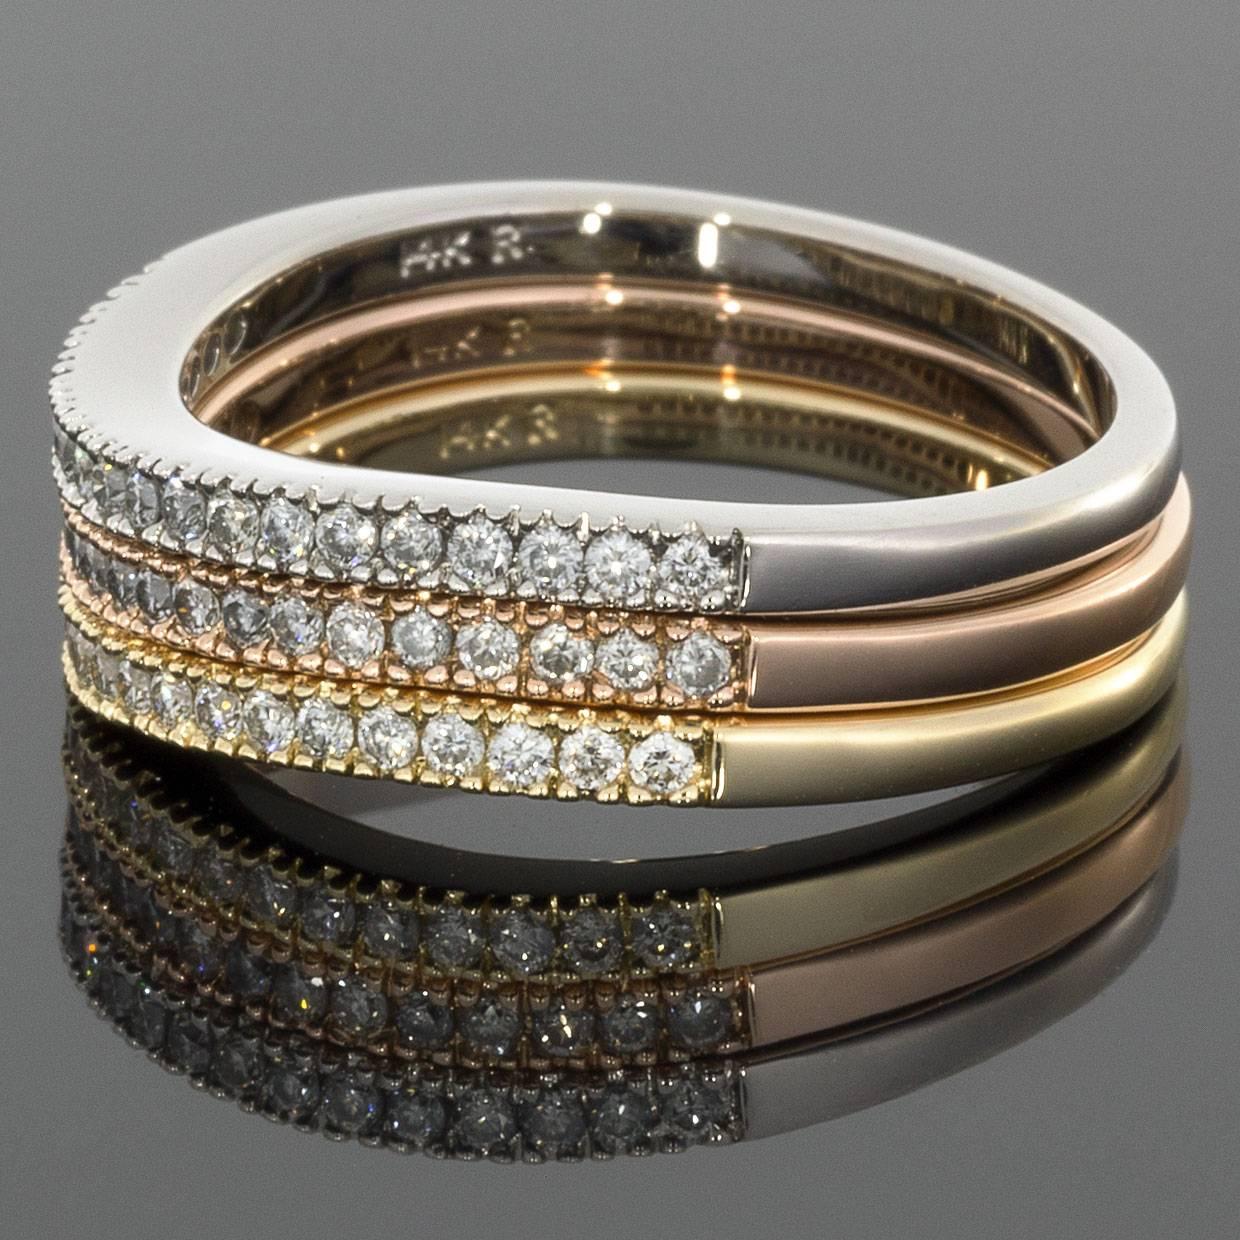 This unique 3 ring set has a beautiful wavy design in 14 karat tri-color gold & features just the right touch of sparkle! The diamonds in all 3 bands have a combined total weight of .50 carat & grade as HI/SI in quality. Comprised of 14 karat